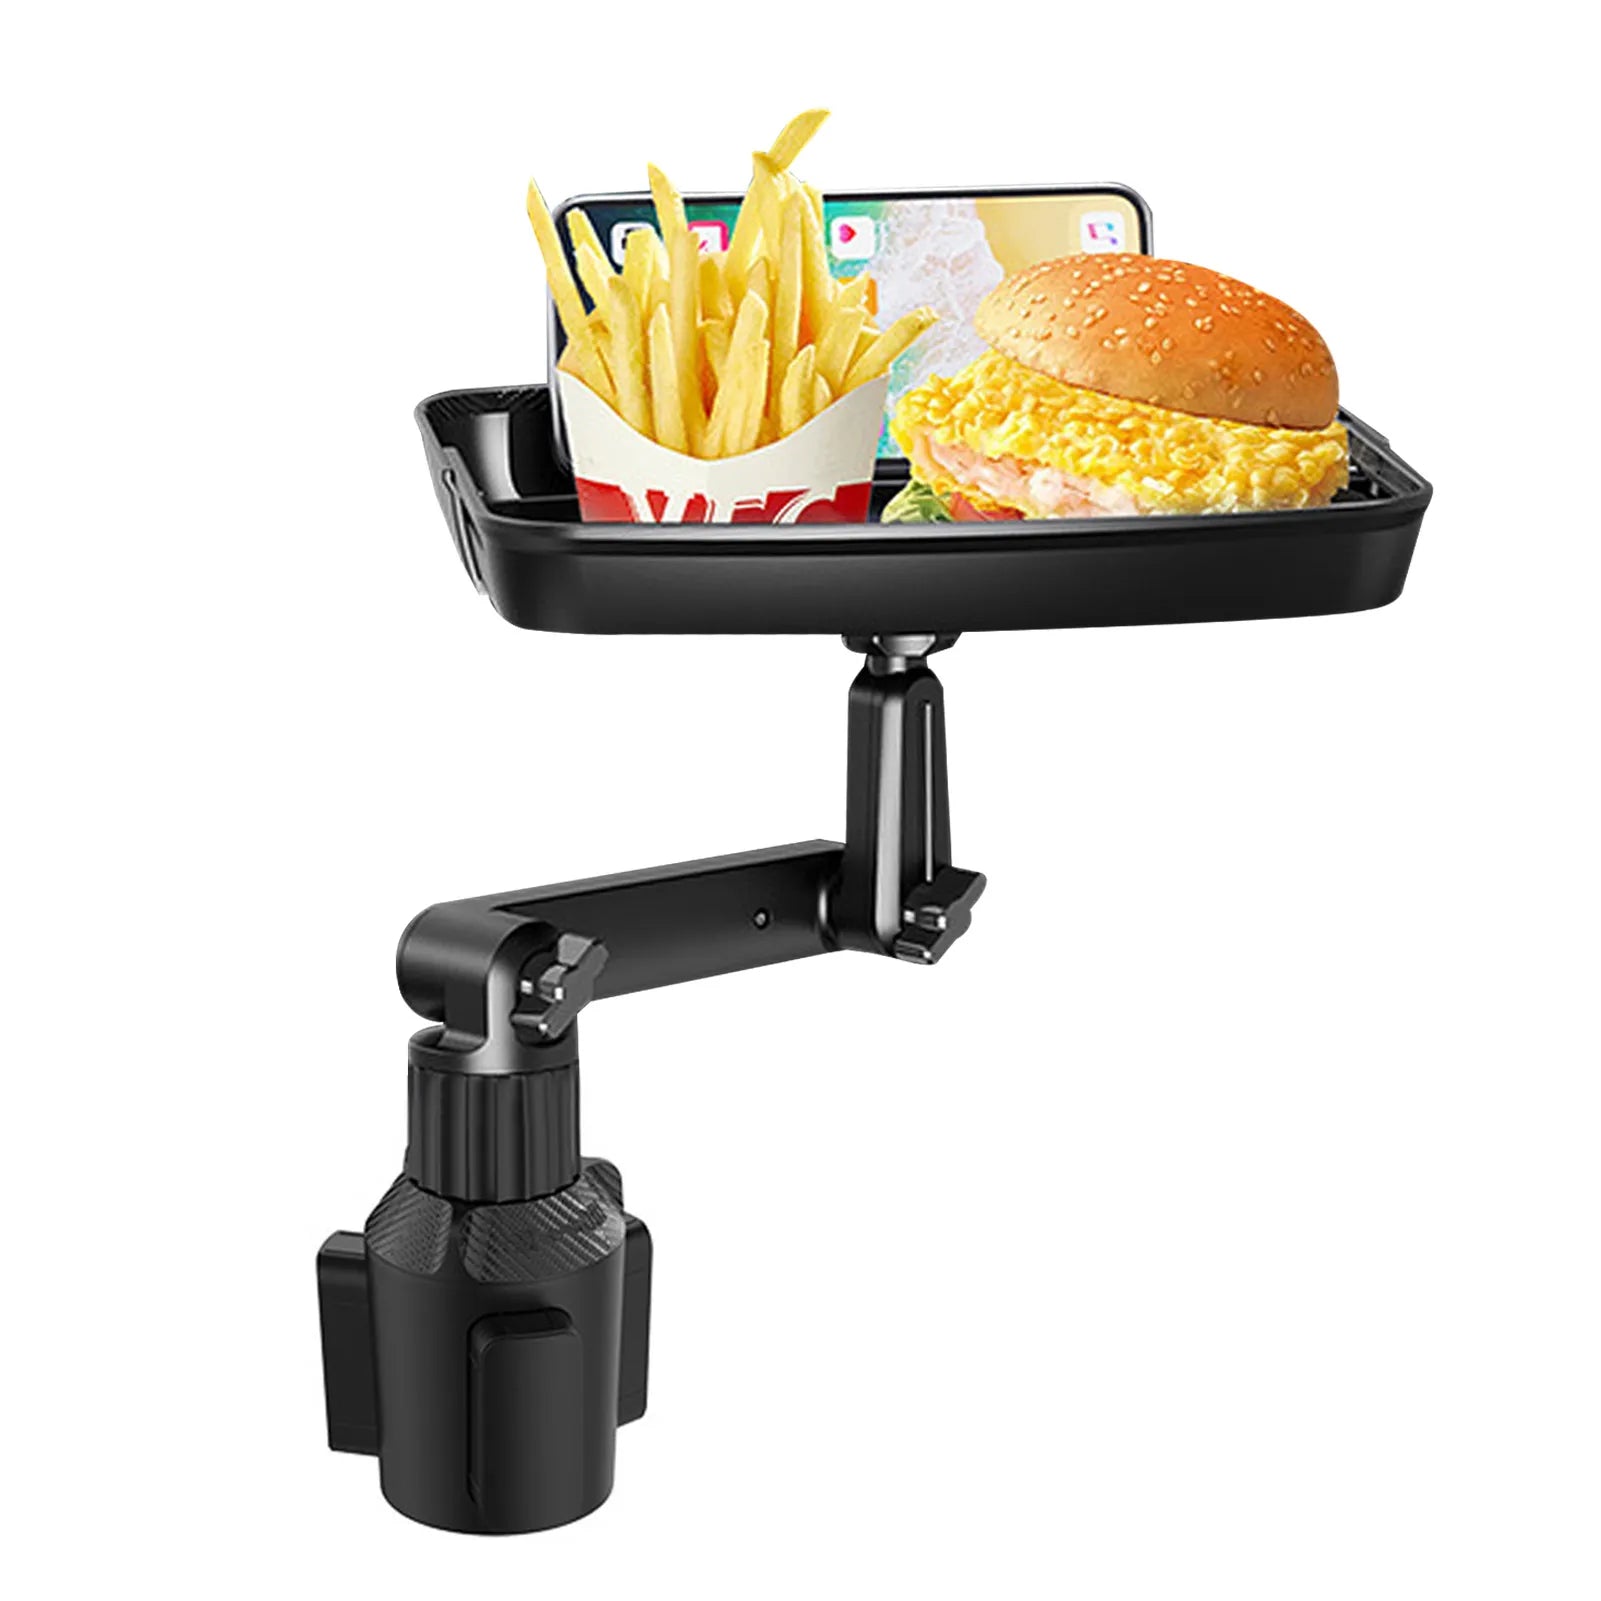 Cup Holder Tray for Car Car Tray Table Passenger Seats 360 Adjustable Stretchable Non-Slip Car Tray for Eating Portable Car